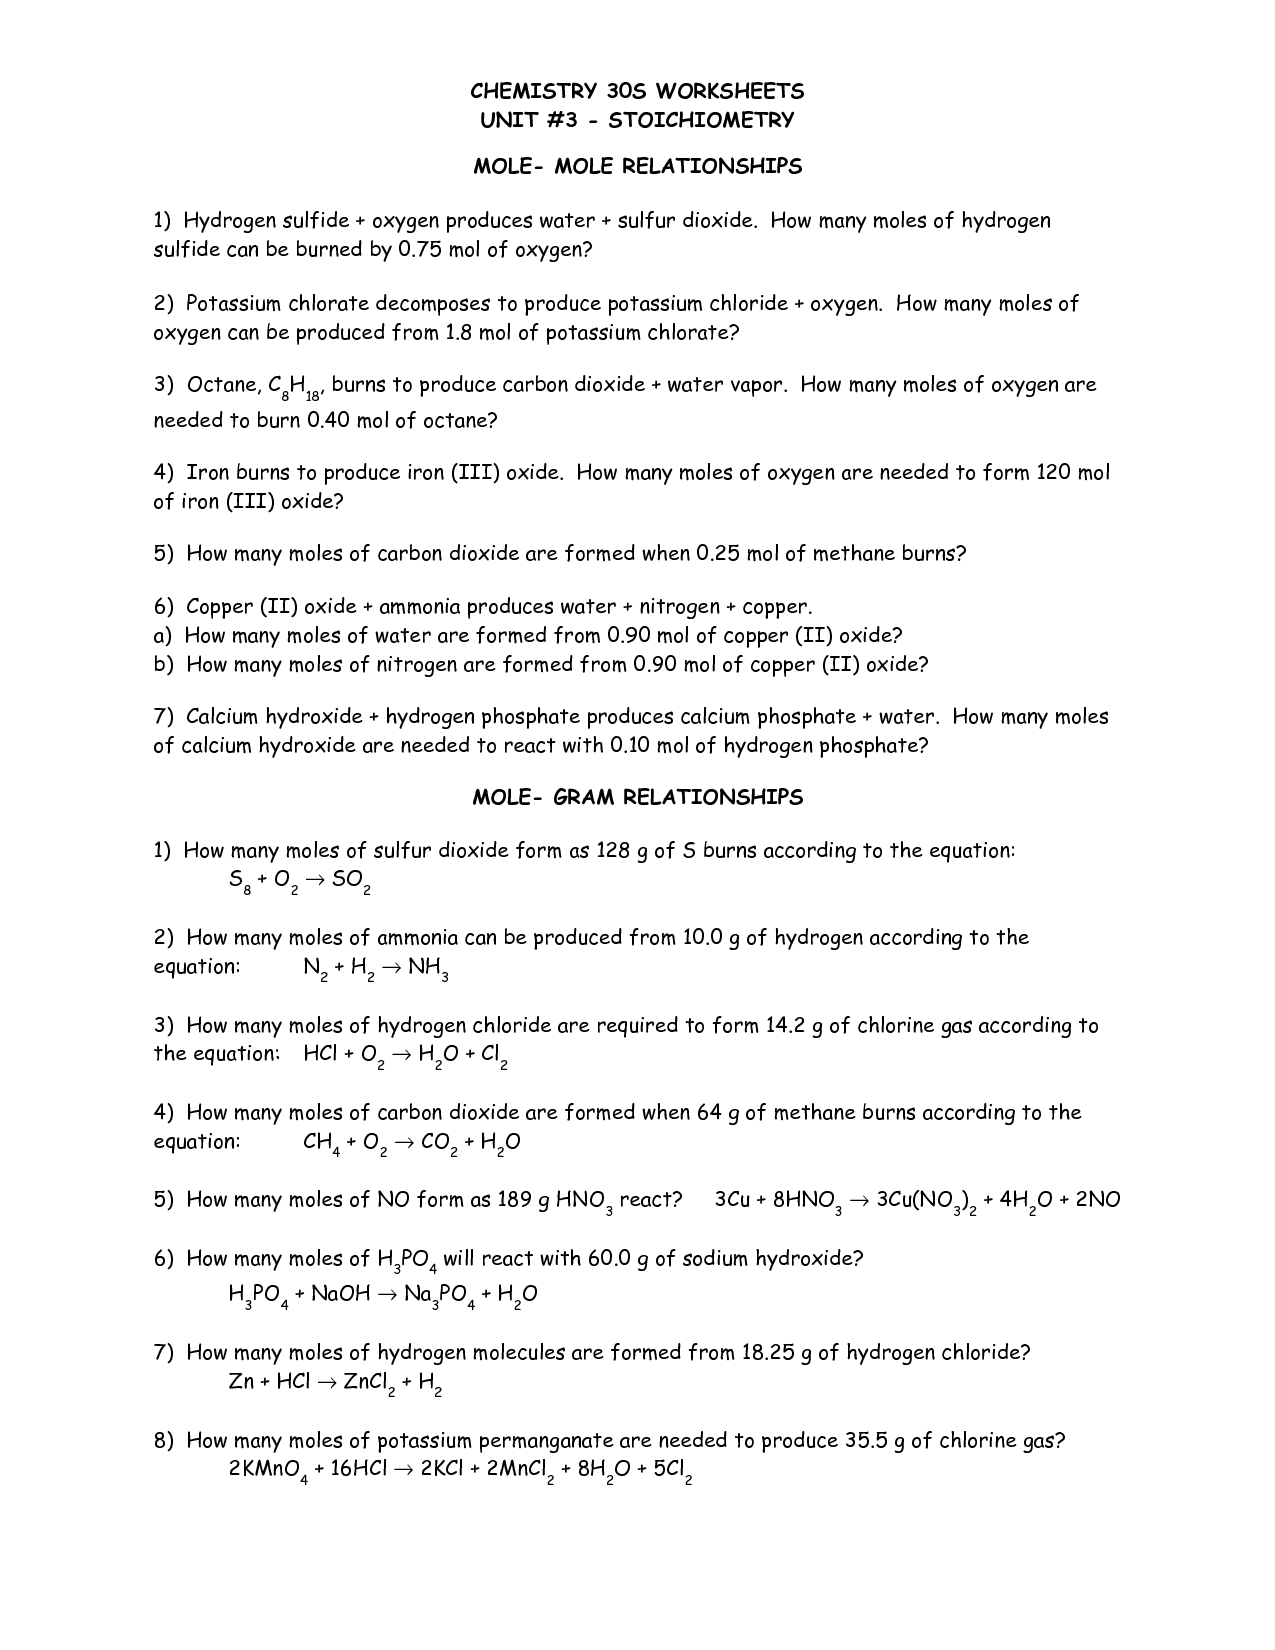 stoichiometry-worksheet-stoichiometry-practice-problems-with-answers-kidsworksheetfun